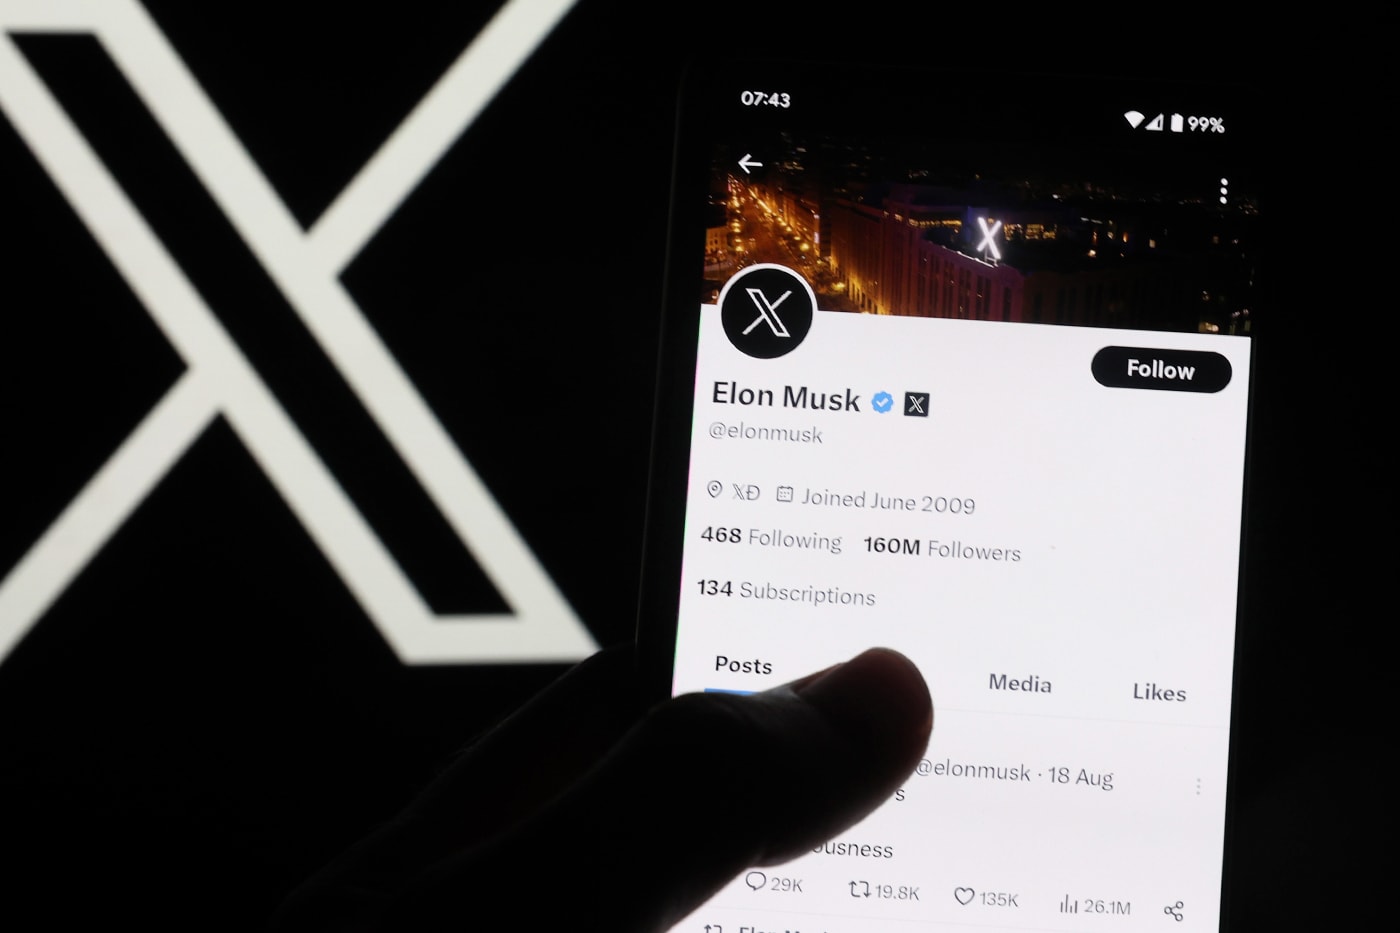 X Is Reportedly Selling Recycled Handles for $50,000 USD elon musk twitter tesla forbes purging accounts task force @handle team marketplace advertisements revenue